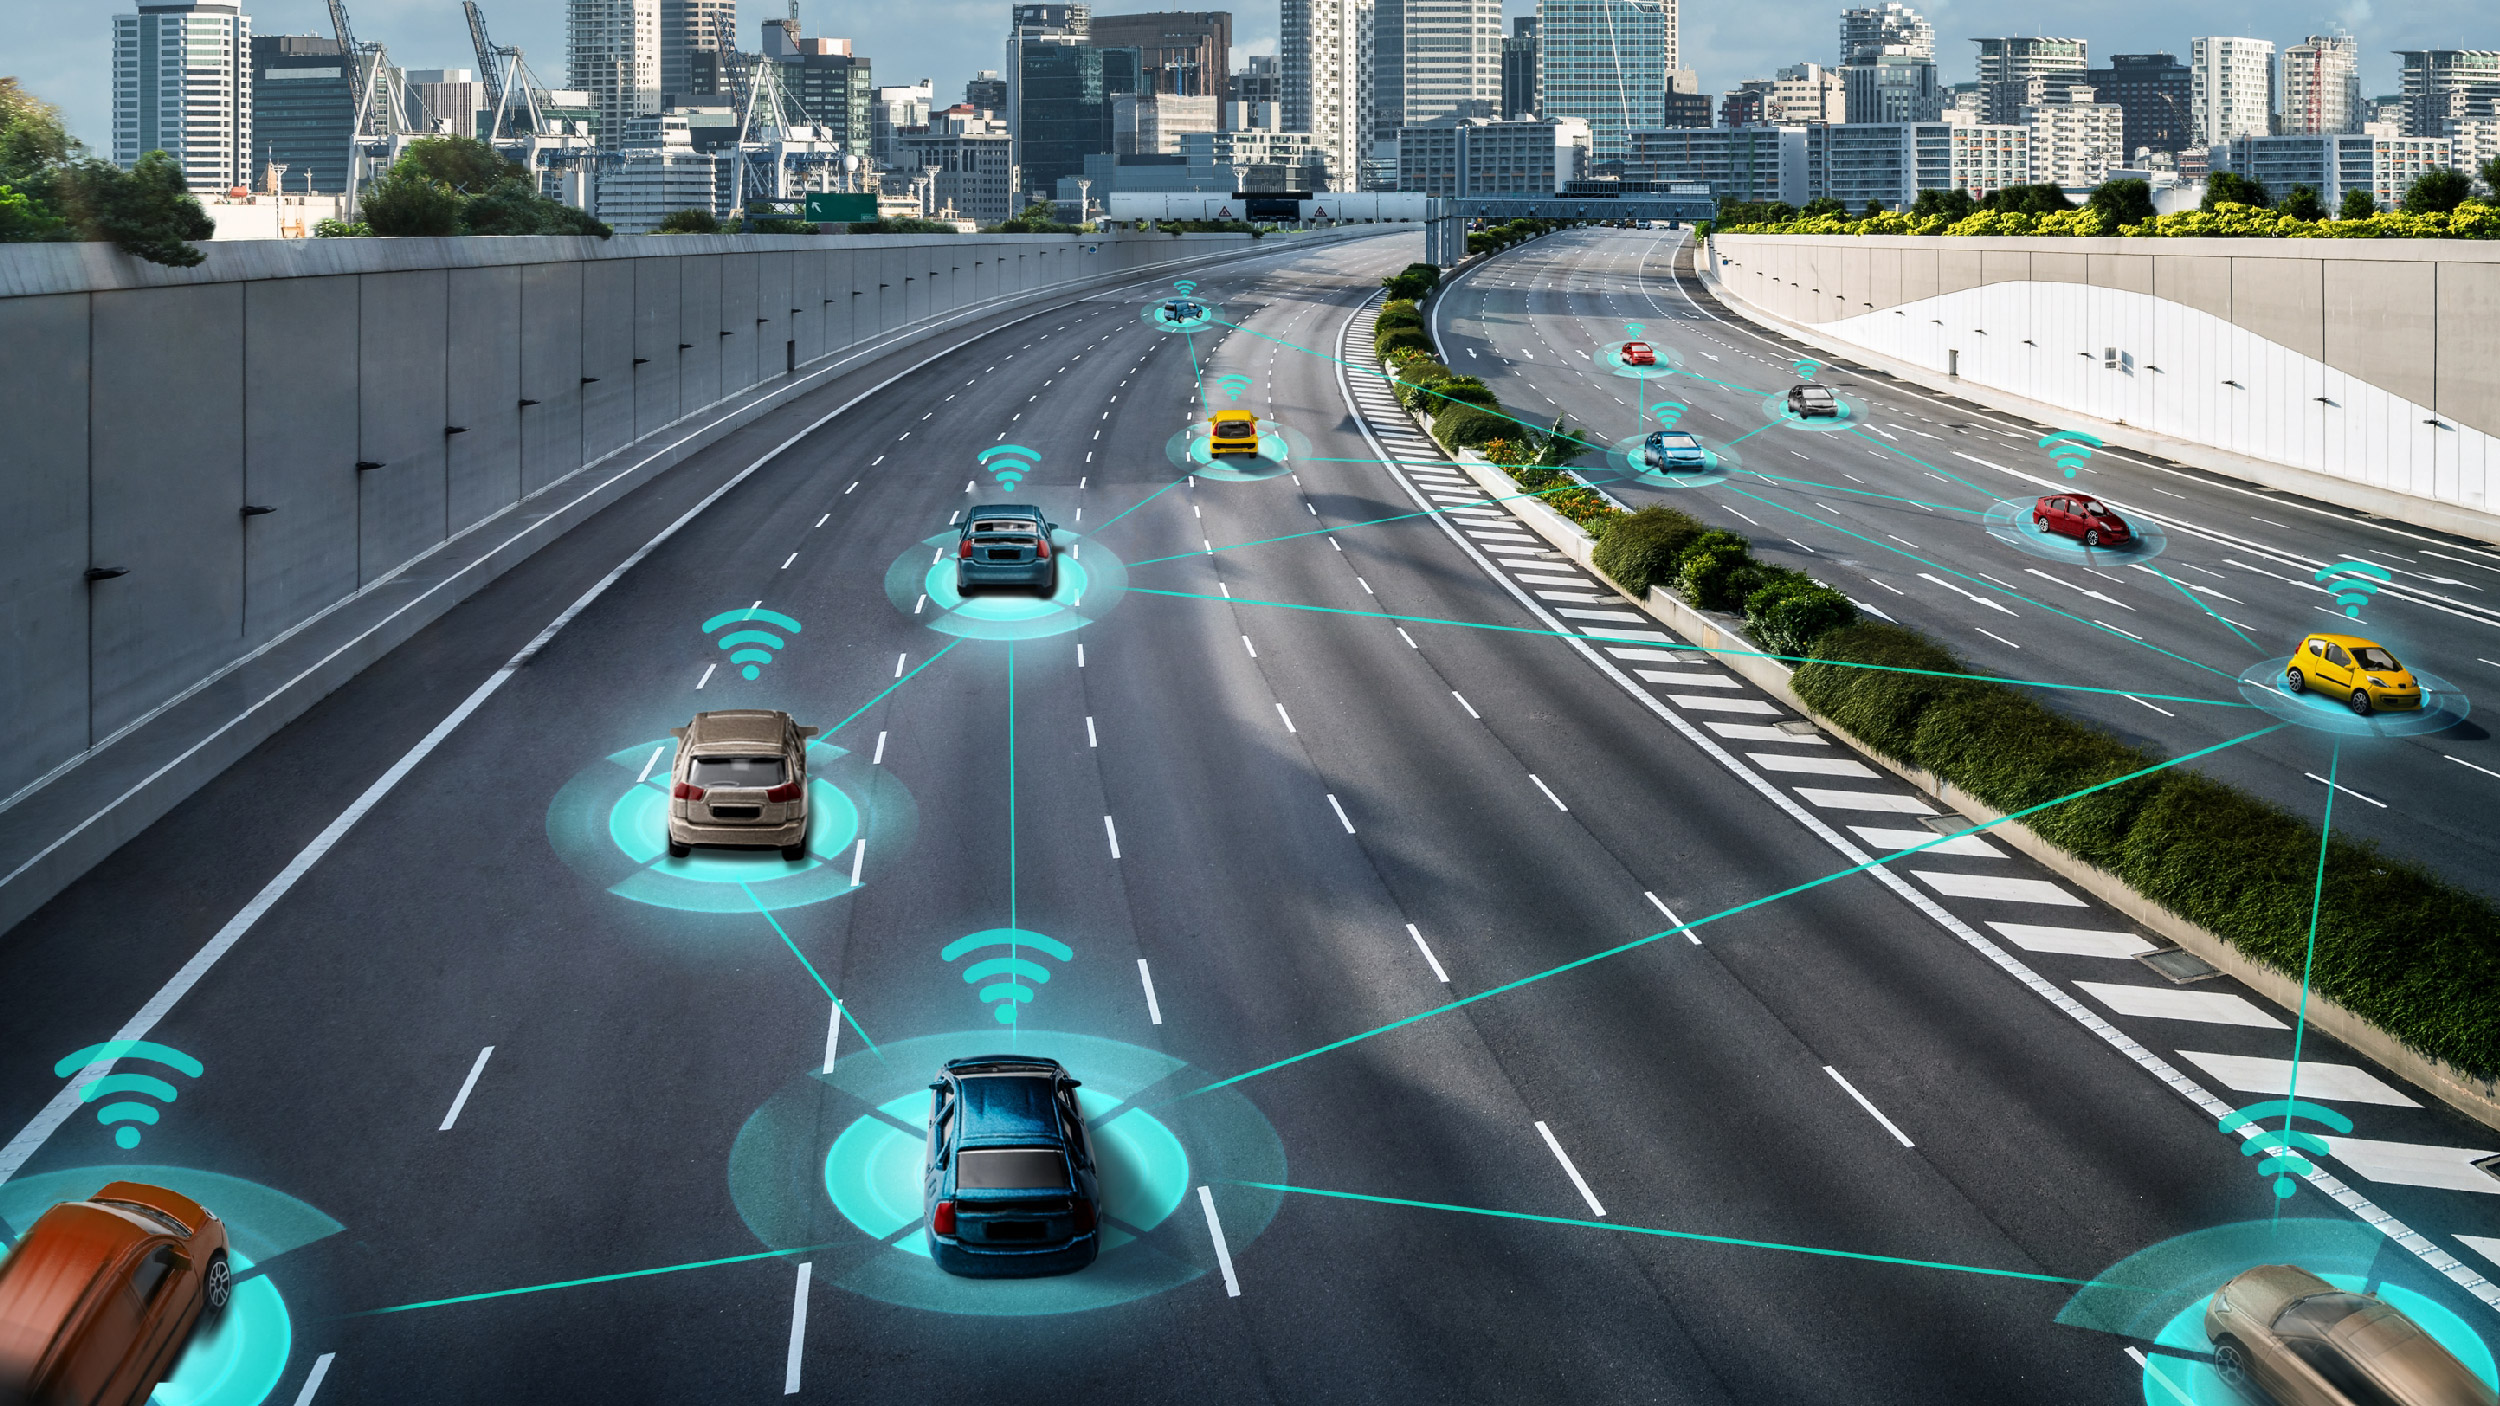 5G and the Future of Autonomous Vehicles 